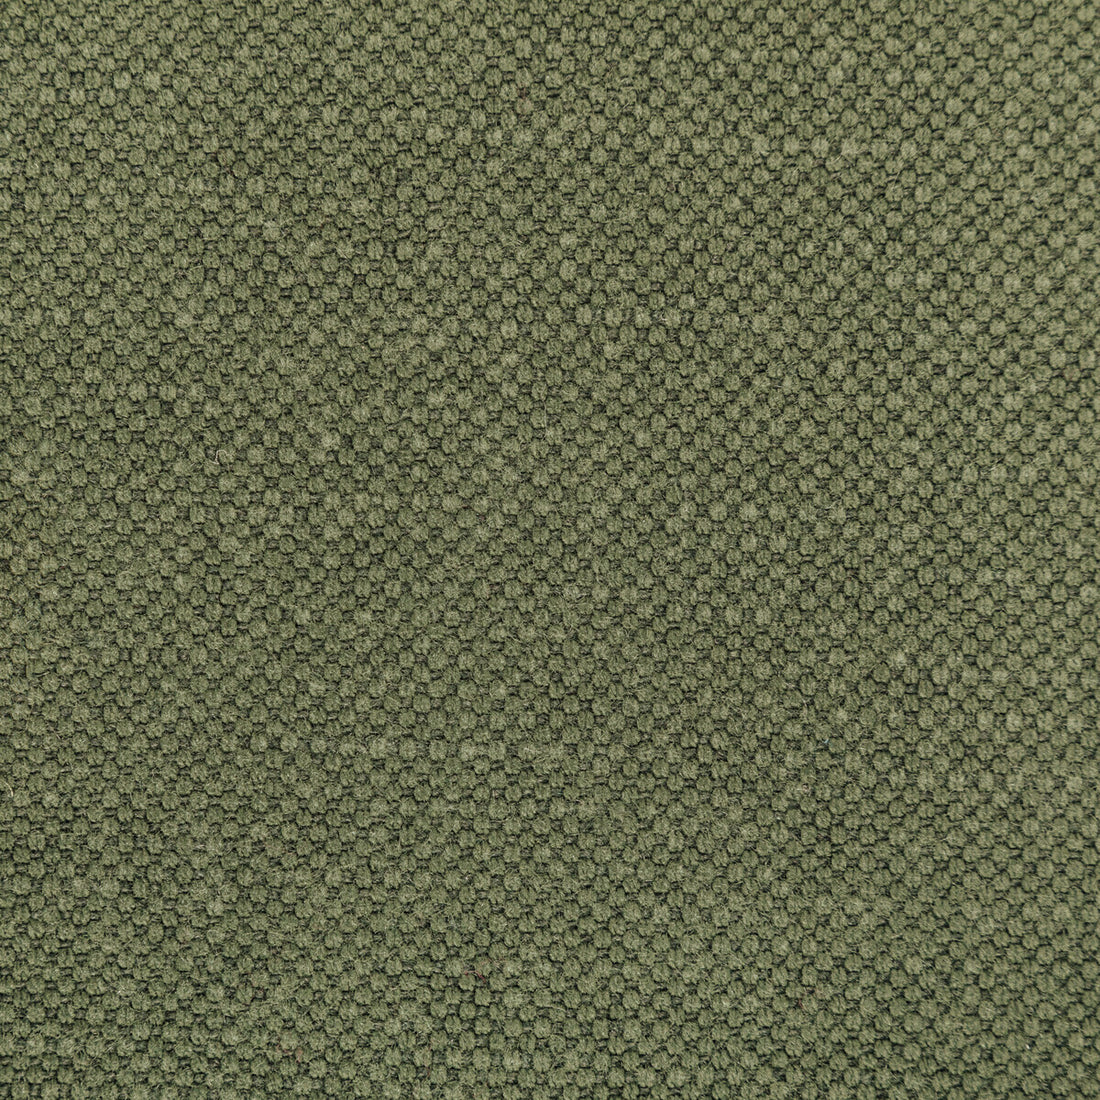 Carson fabric in pine color - pattern 36282.323.0 - by Kravet Basics